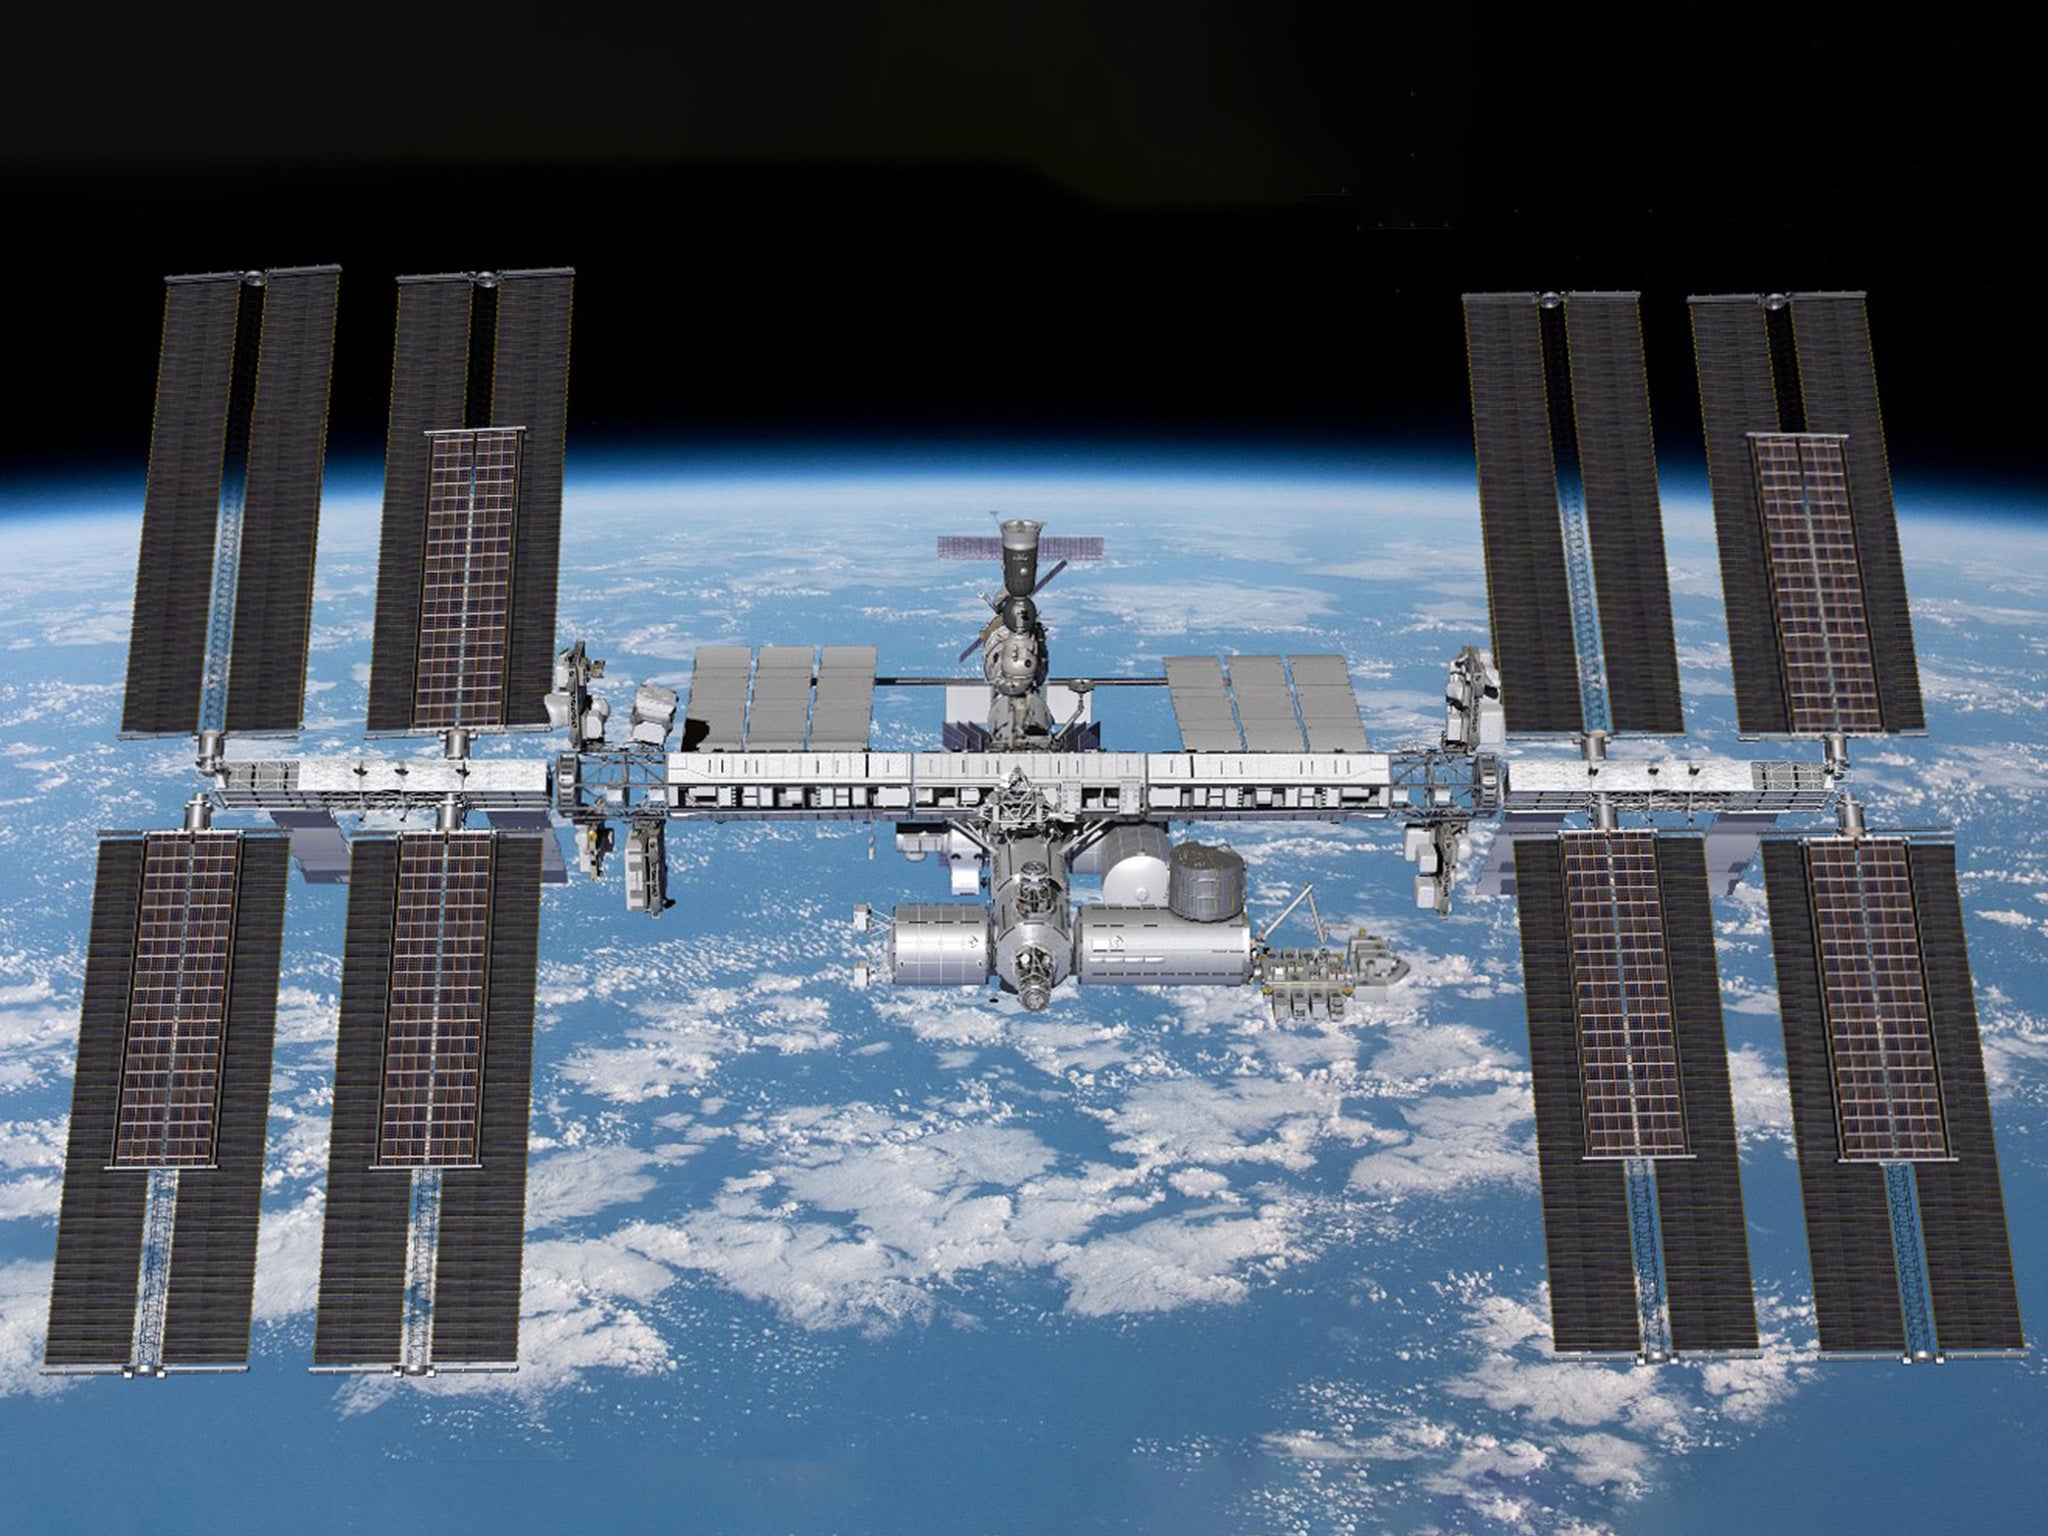 The International Space Station already makes use of solar power in space